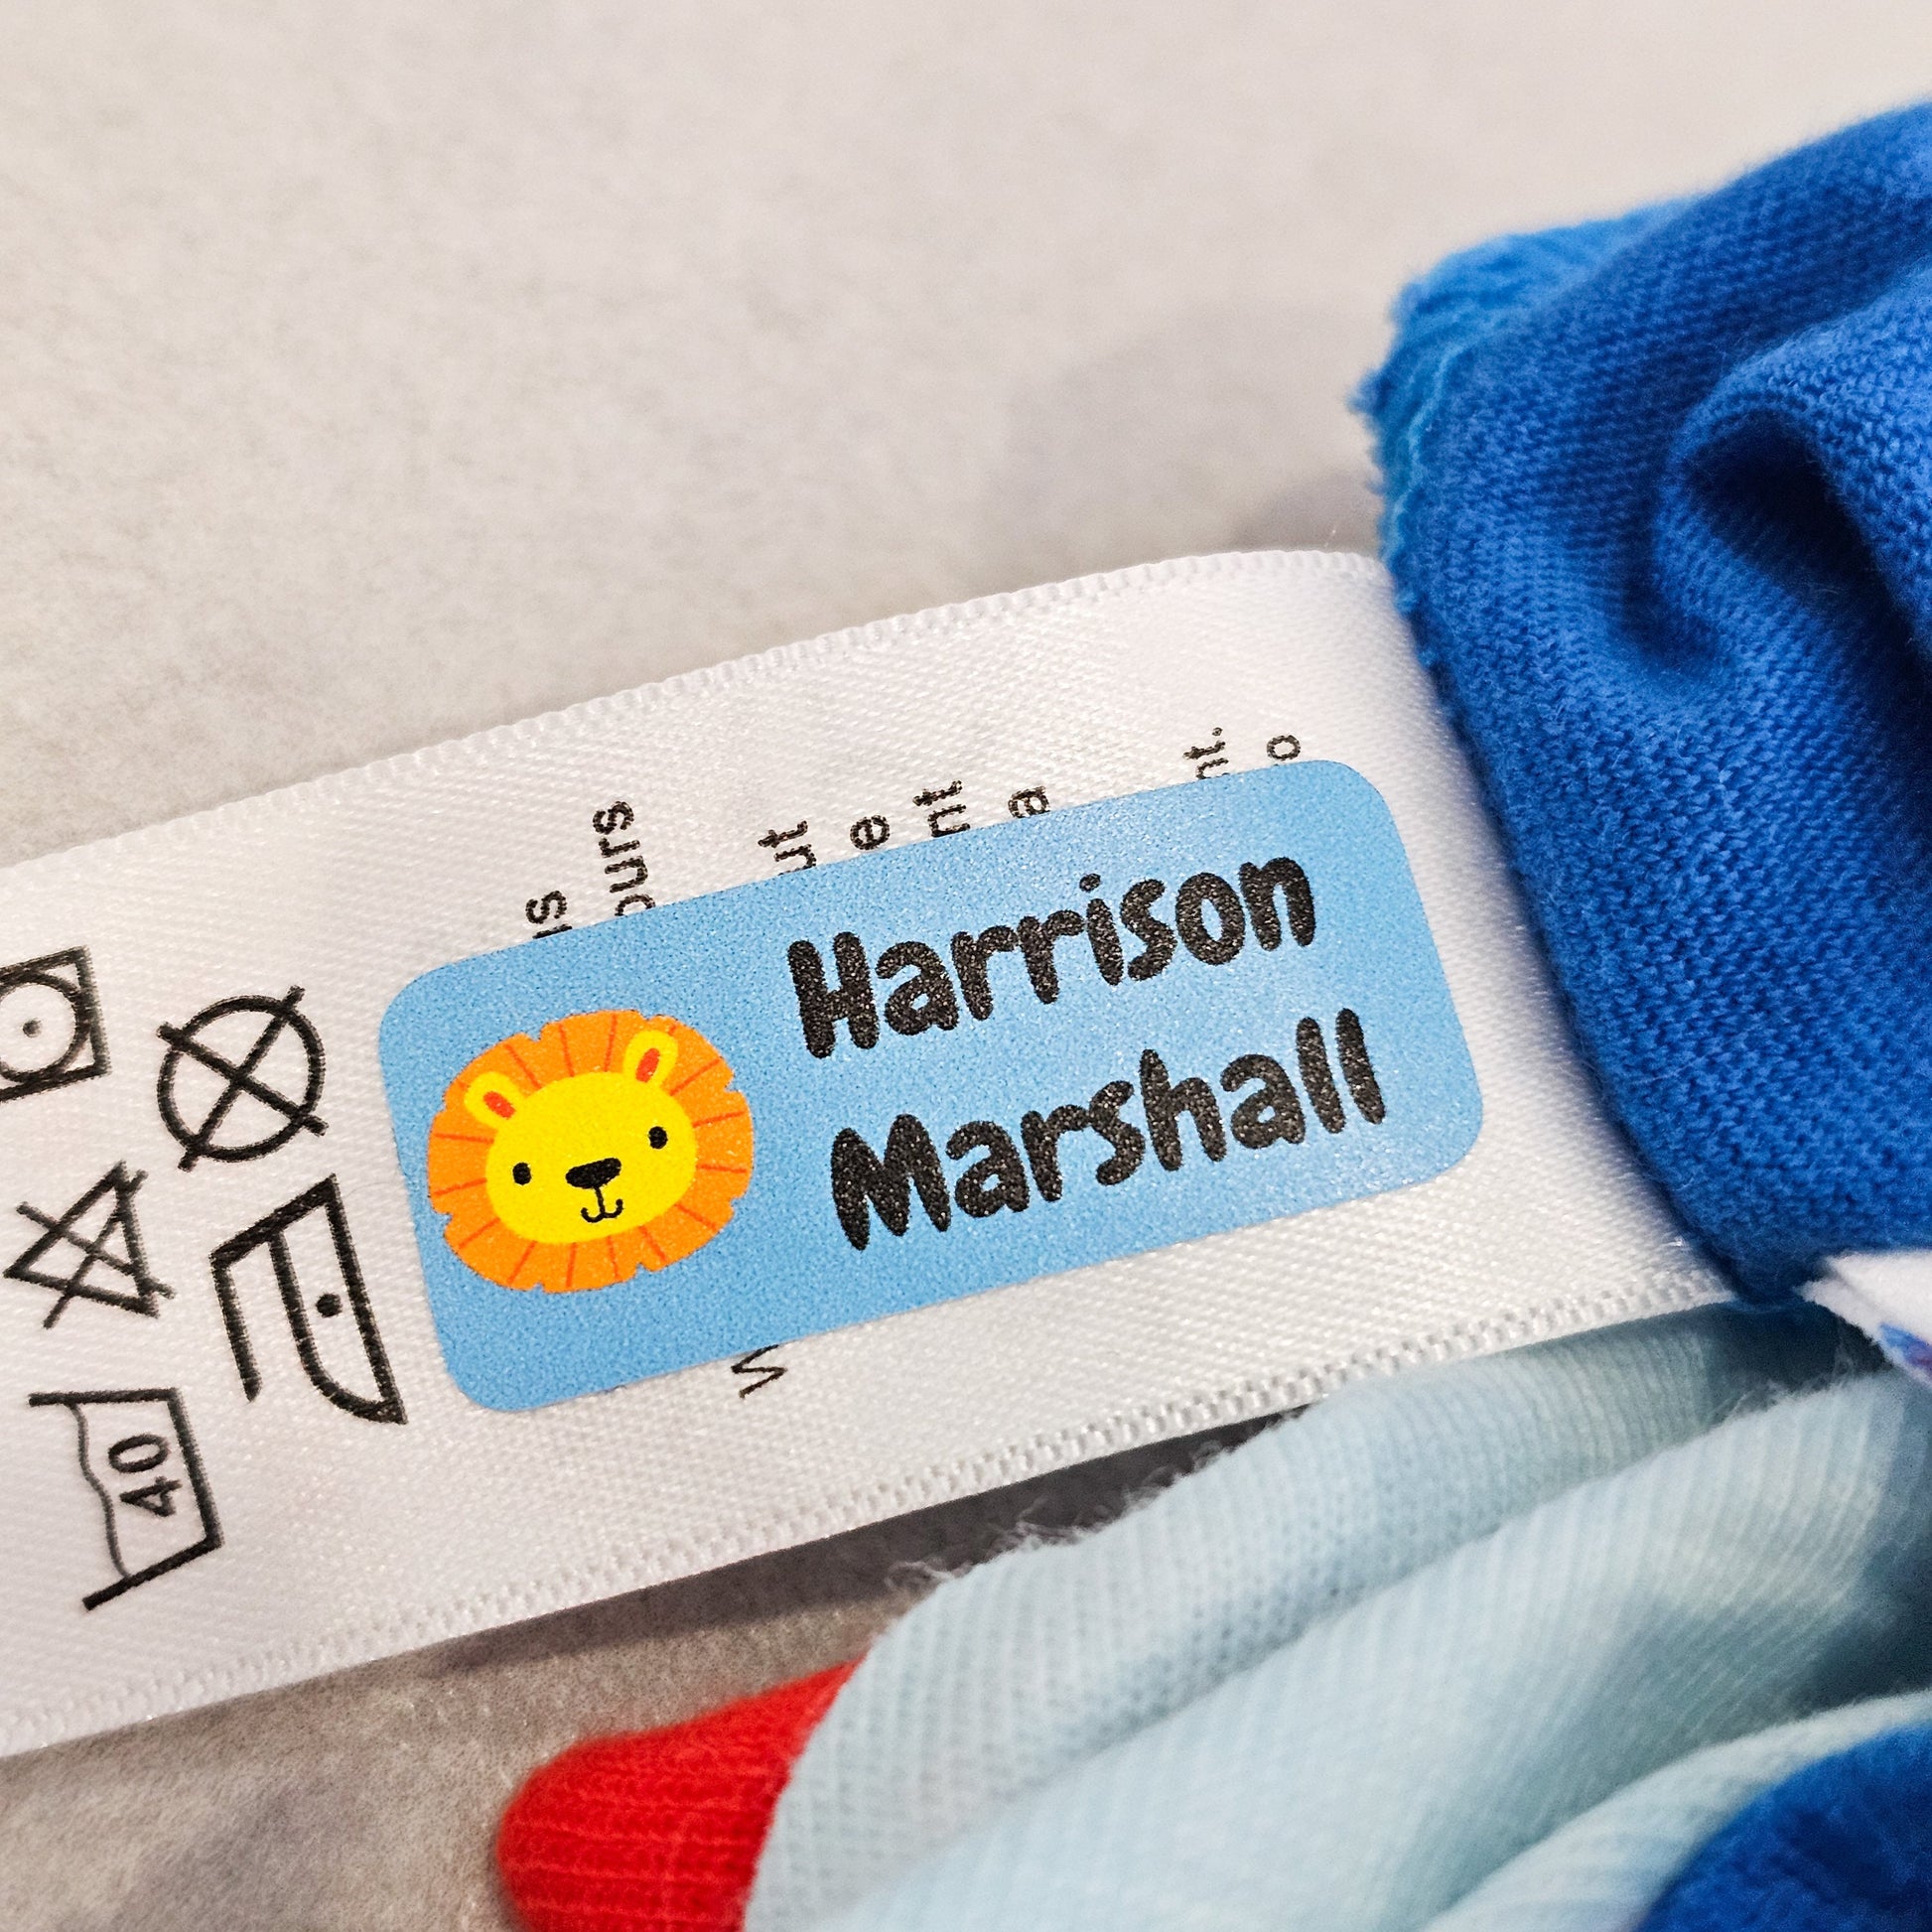 36 Clothing Labels For School Stick On no Iron Name Tags Personalised Labels For Kids Children